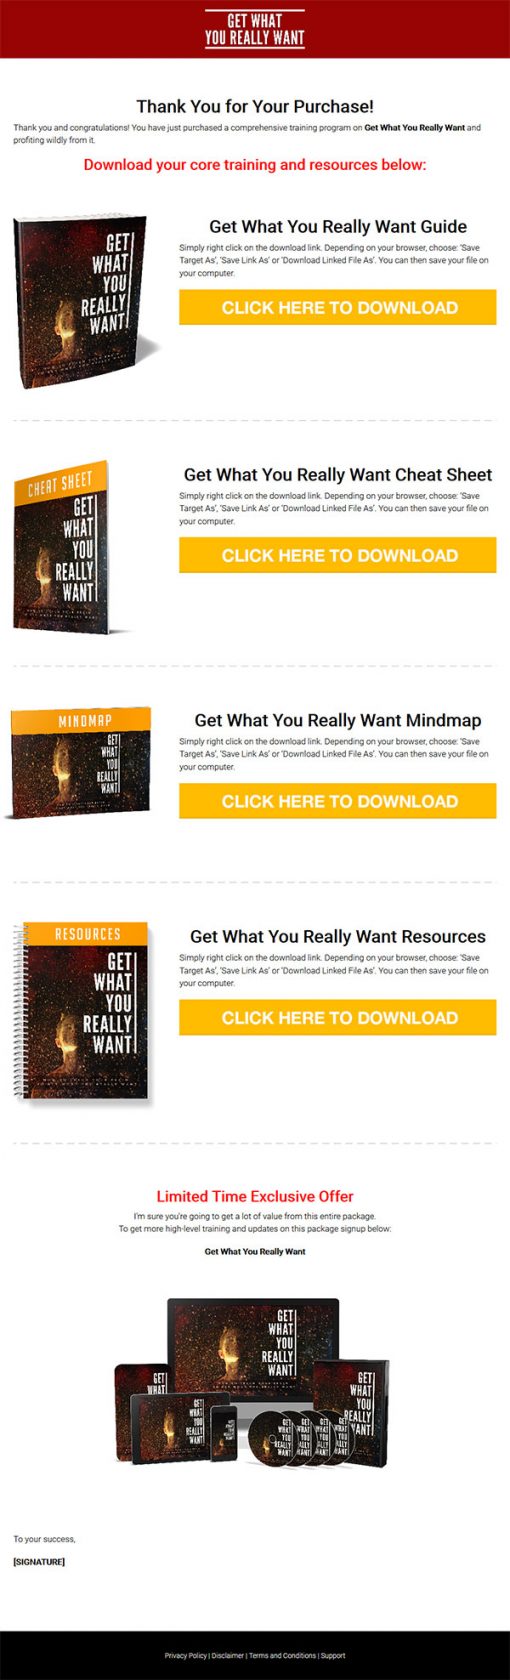 Get What You Really Want Ebook and Videos MRR